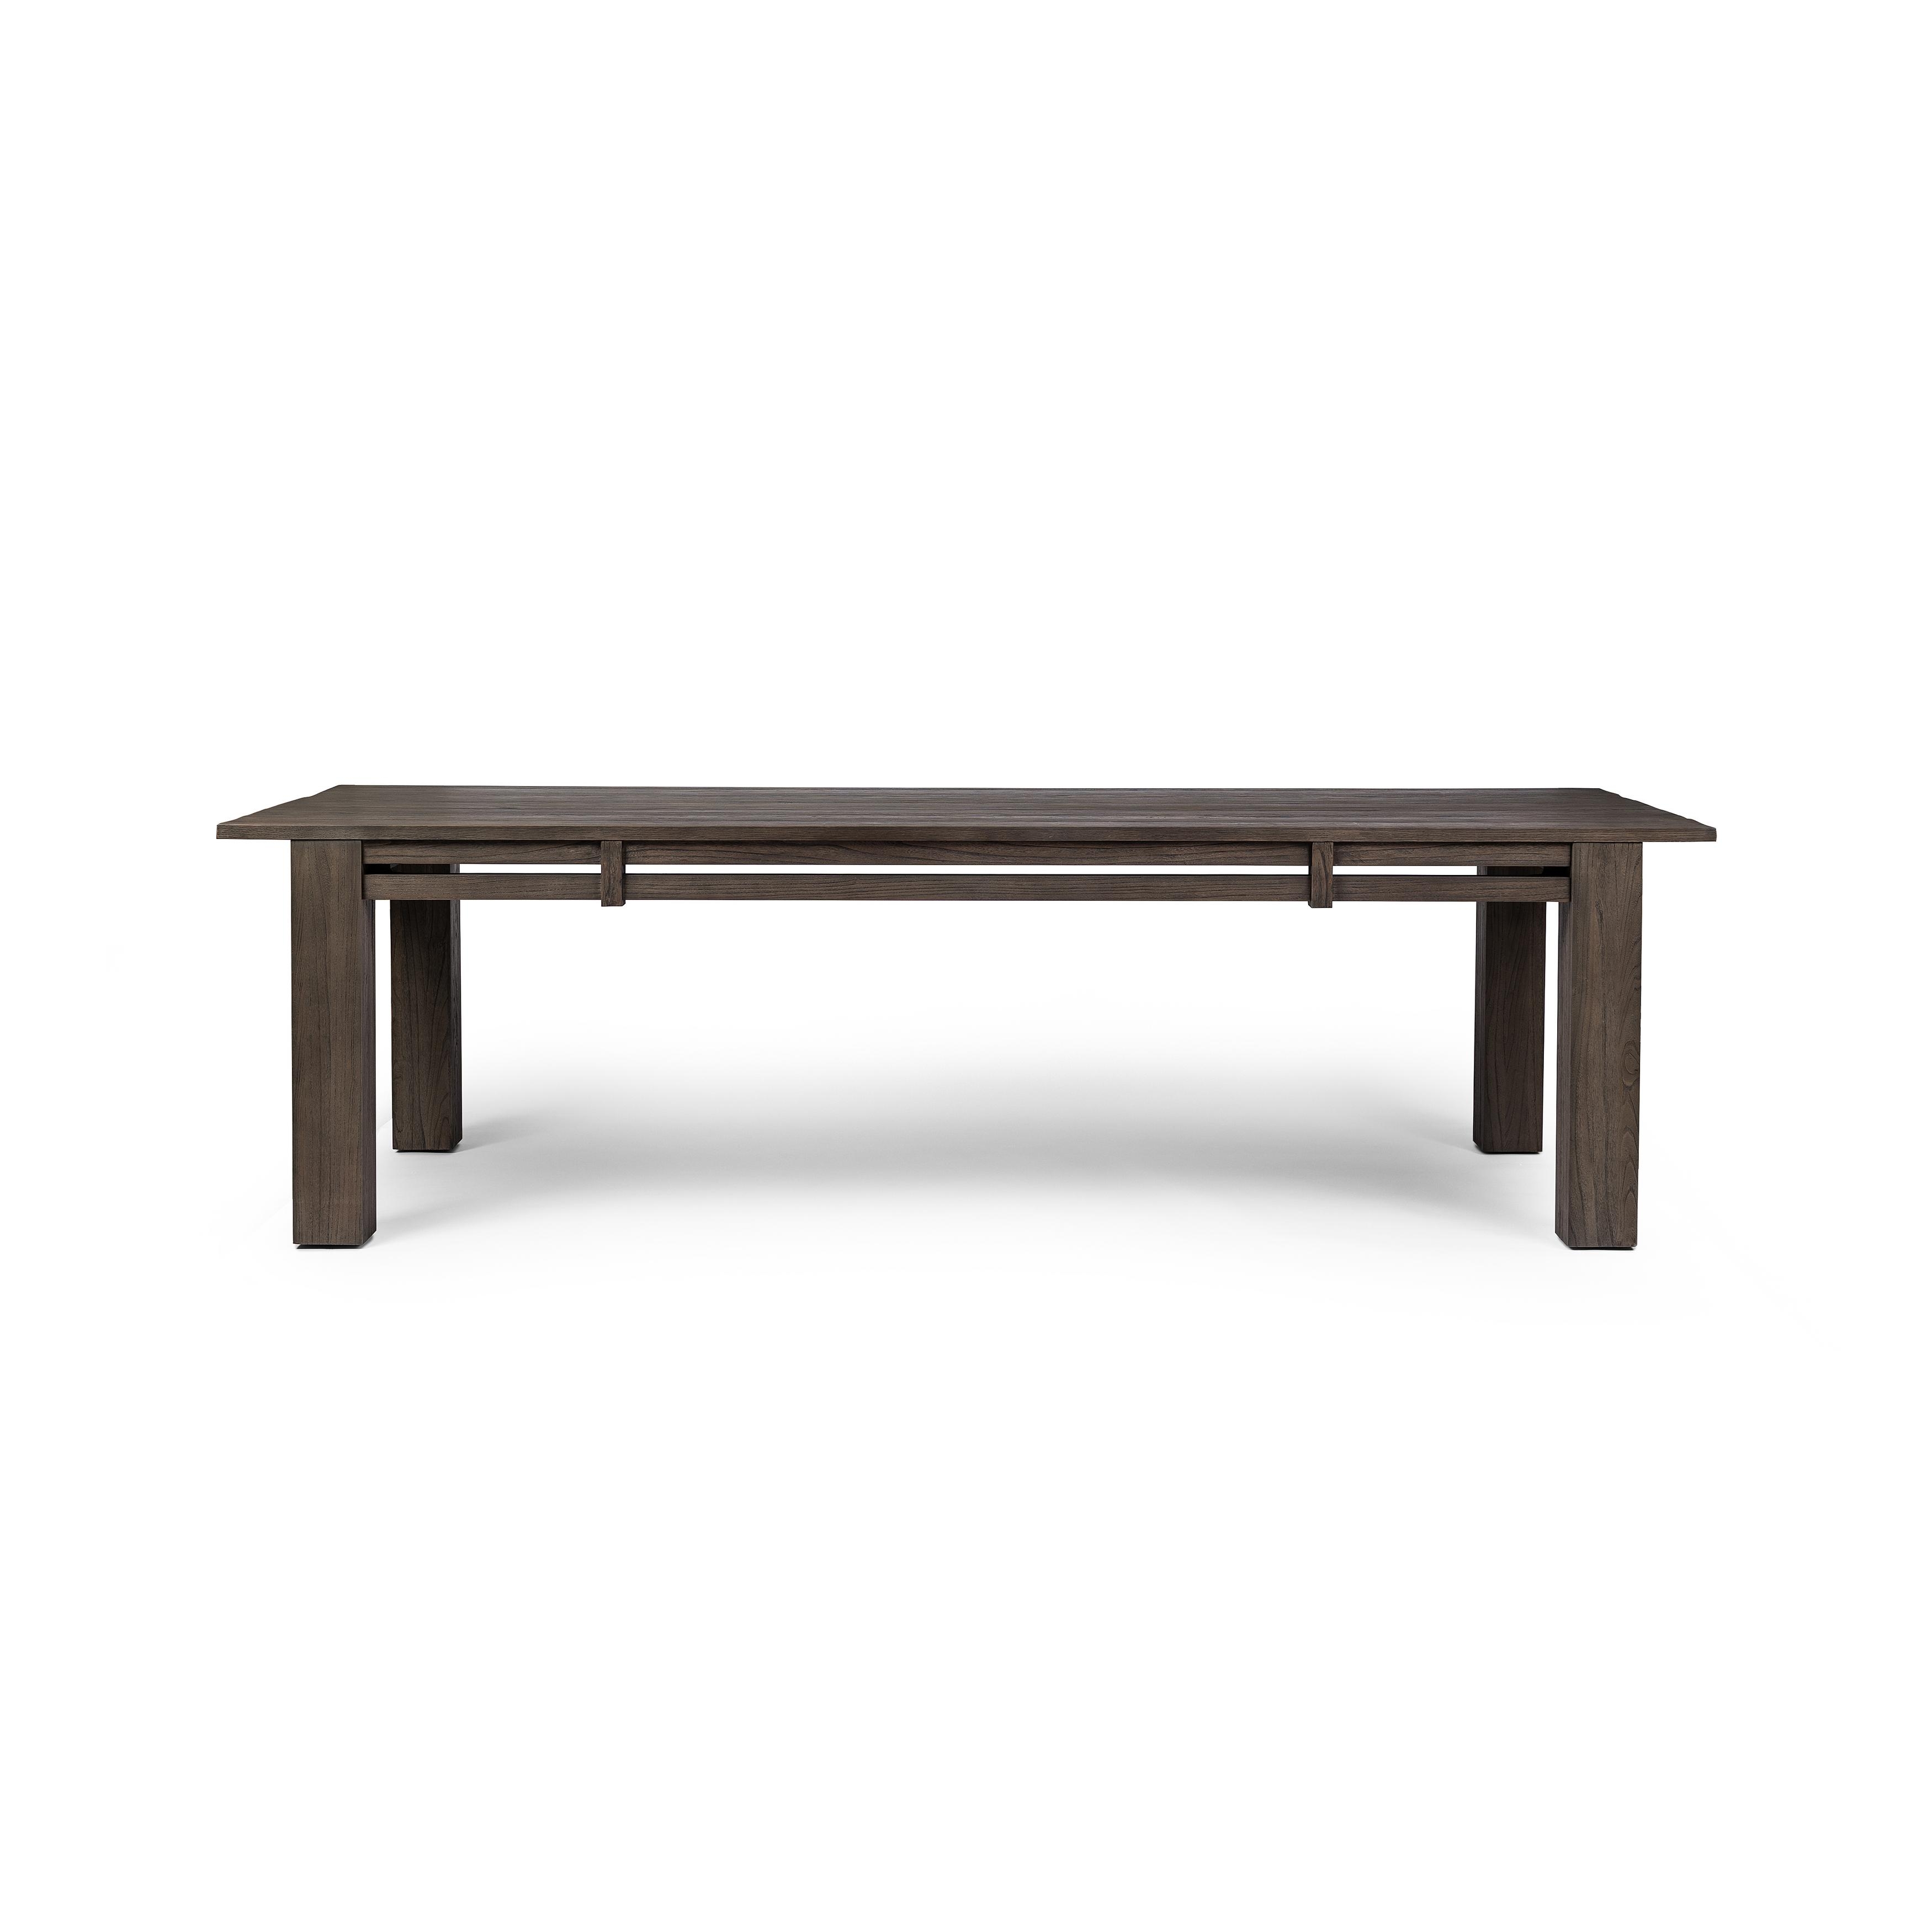 Willow Dining Table-Weathered Elm - Image 3